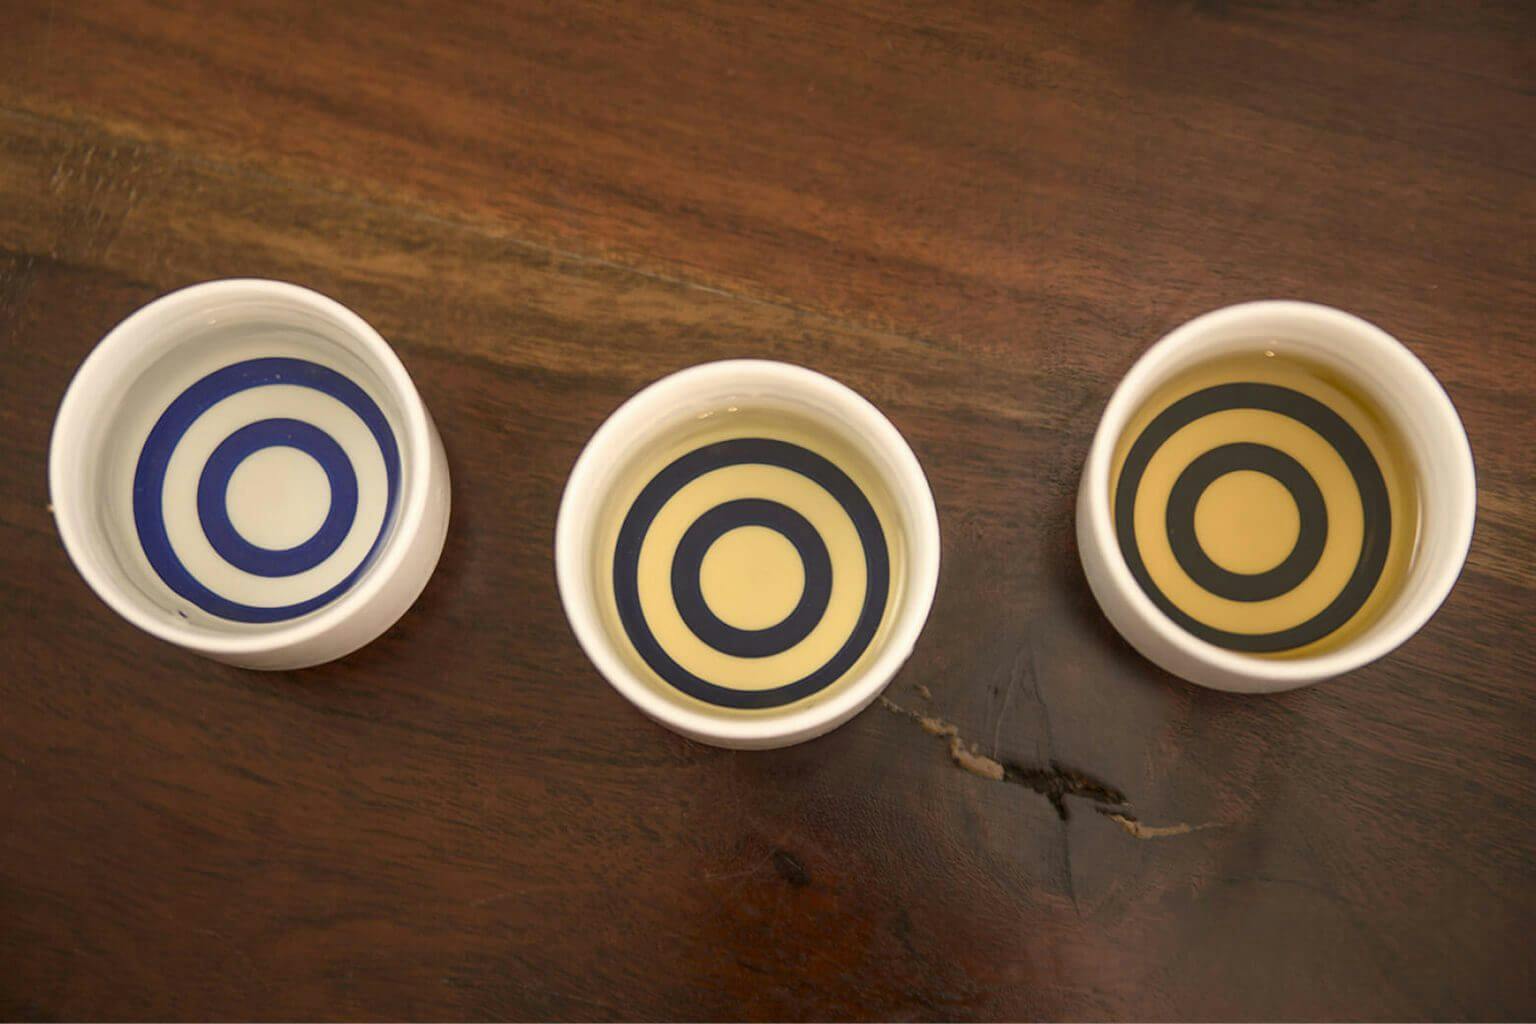 The contrast provided by the blue rings of the white janome cup make it easier to analyze sake color.